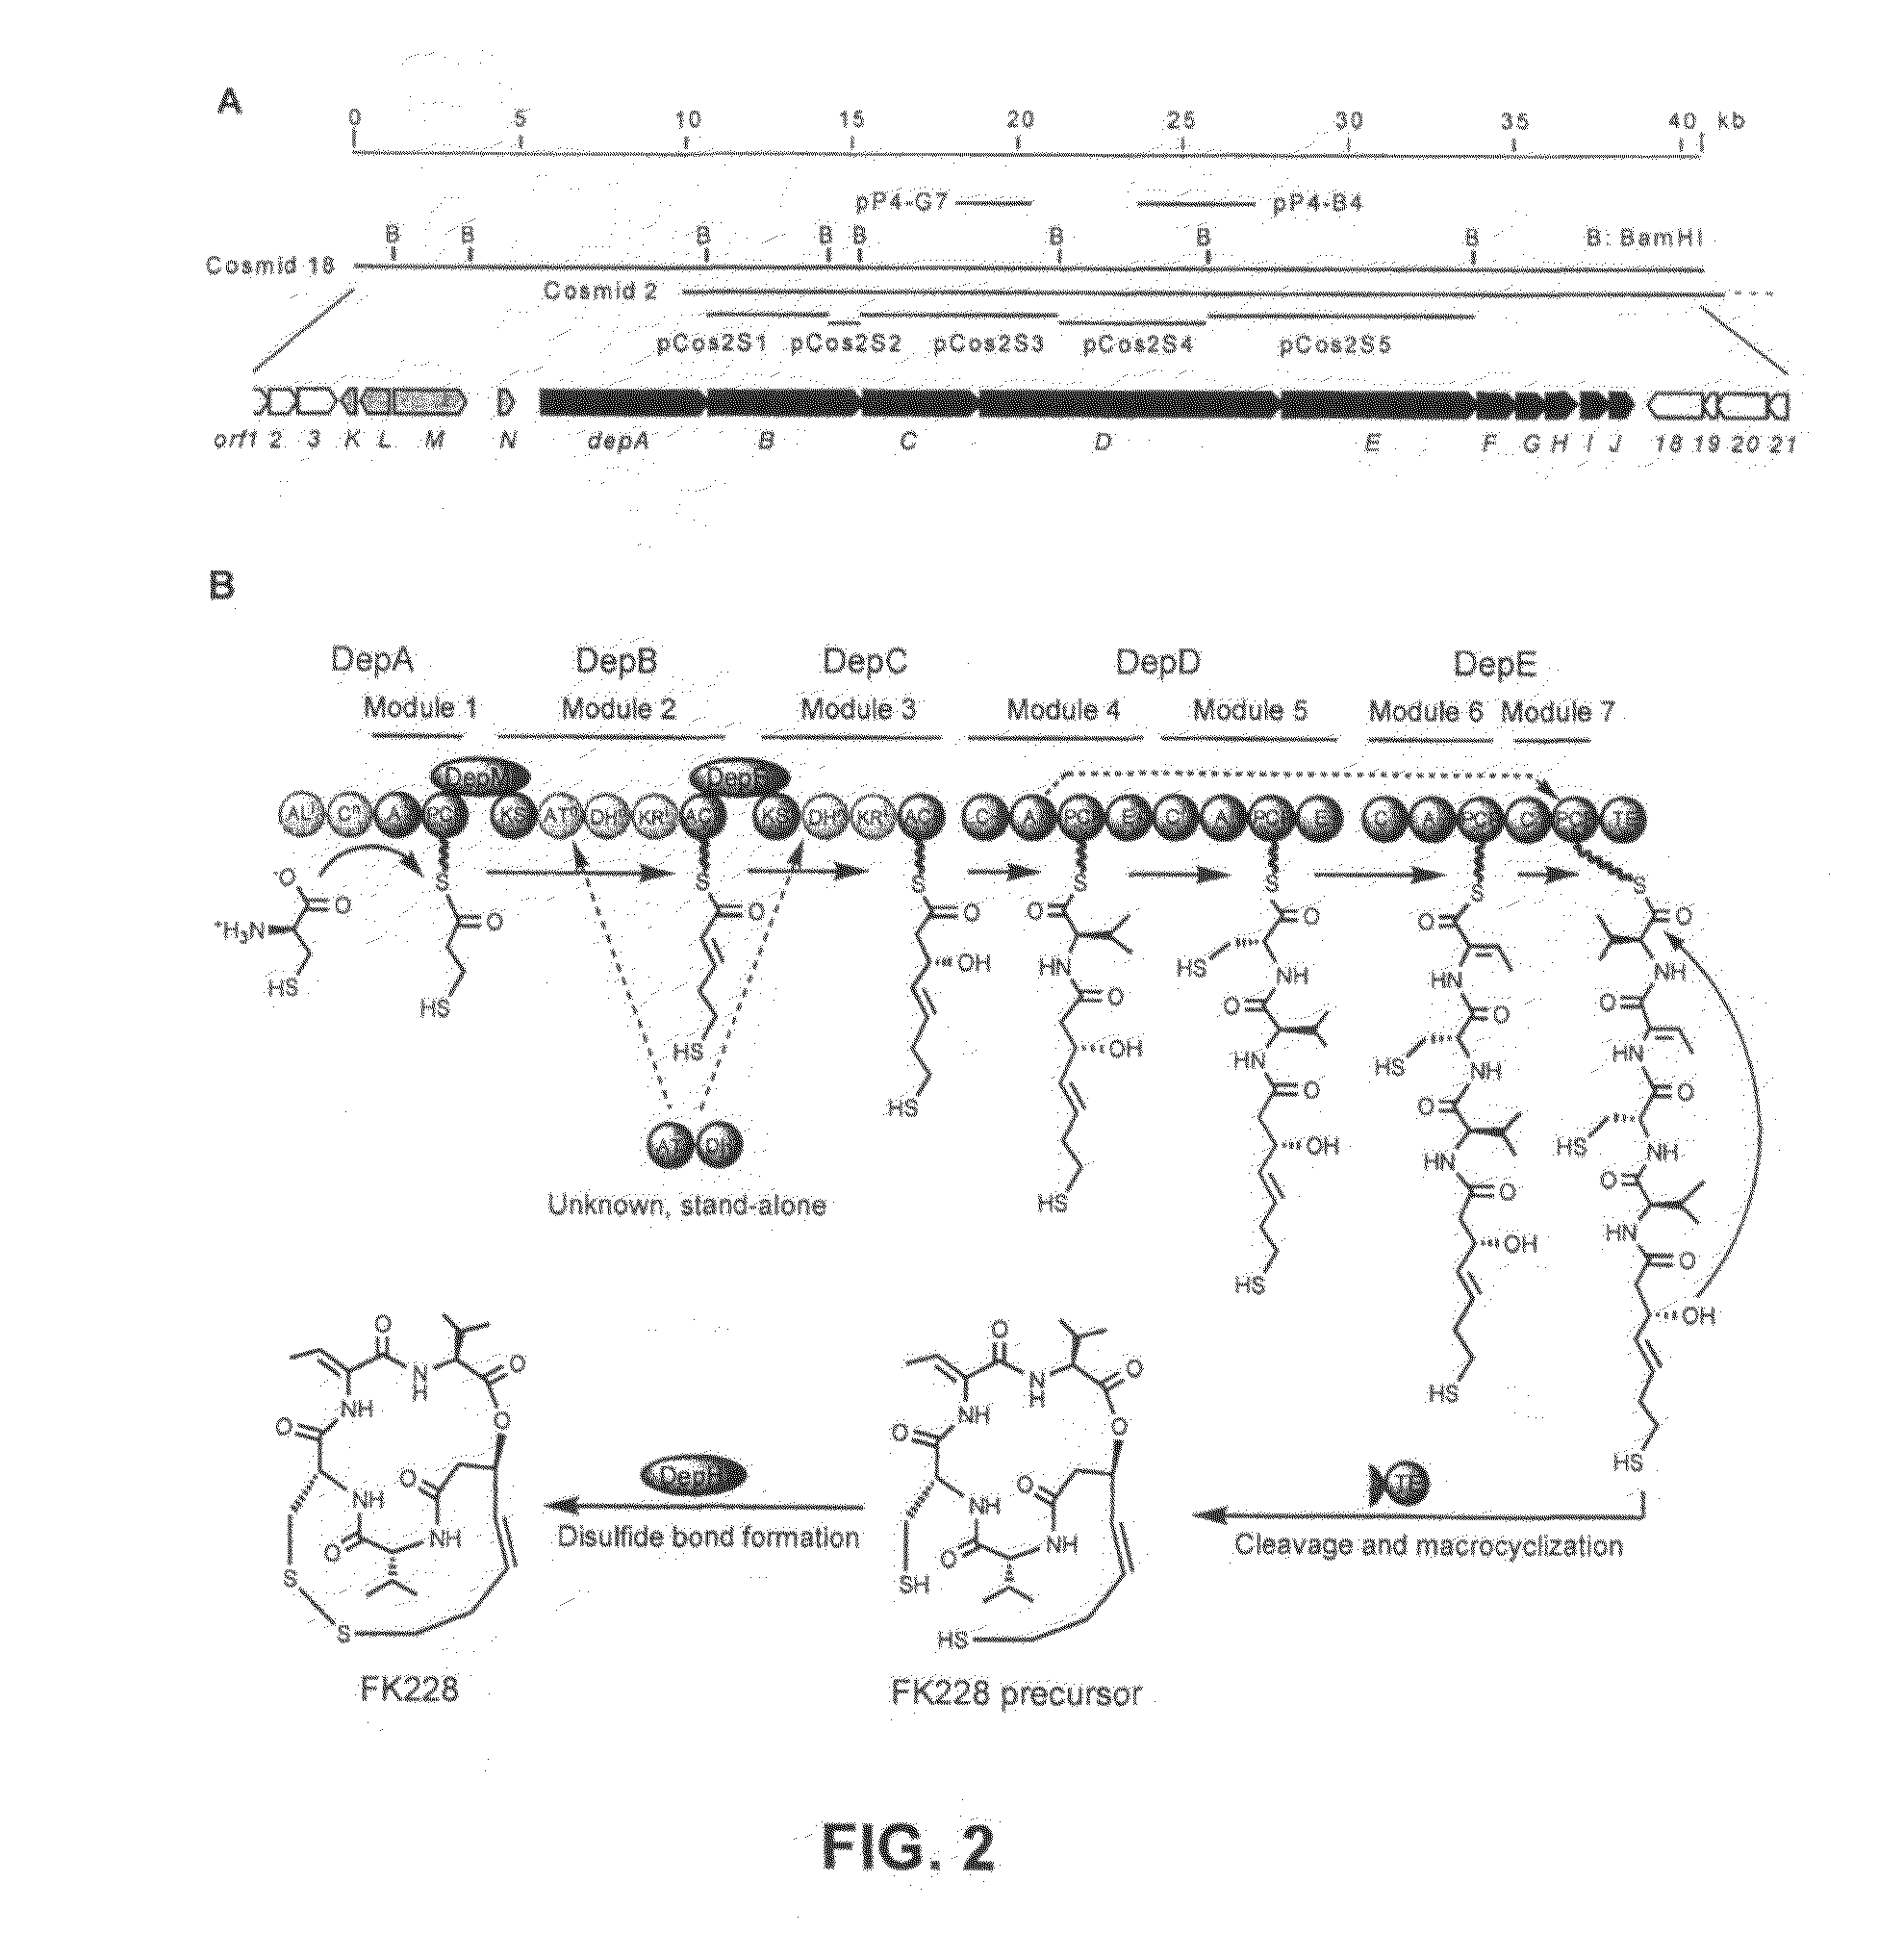 Sequences for fk228 biosynthesis and methods of synthesizing fk228 and fk228 analogs